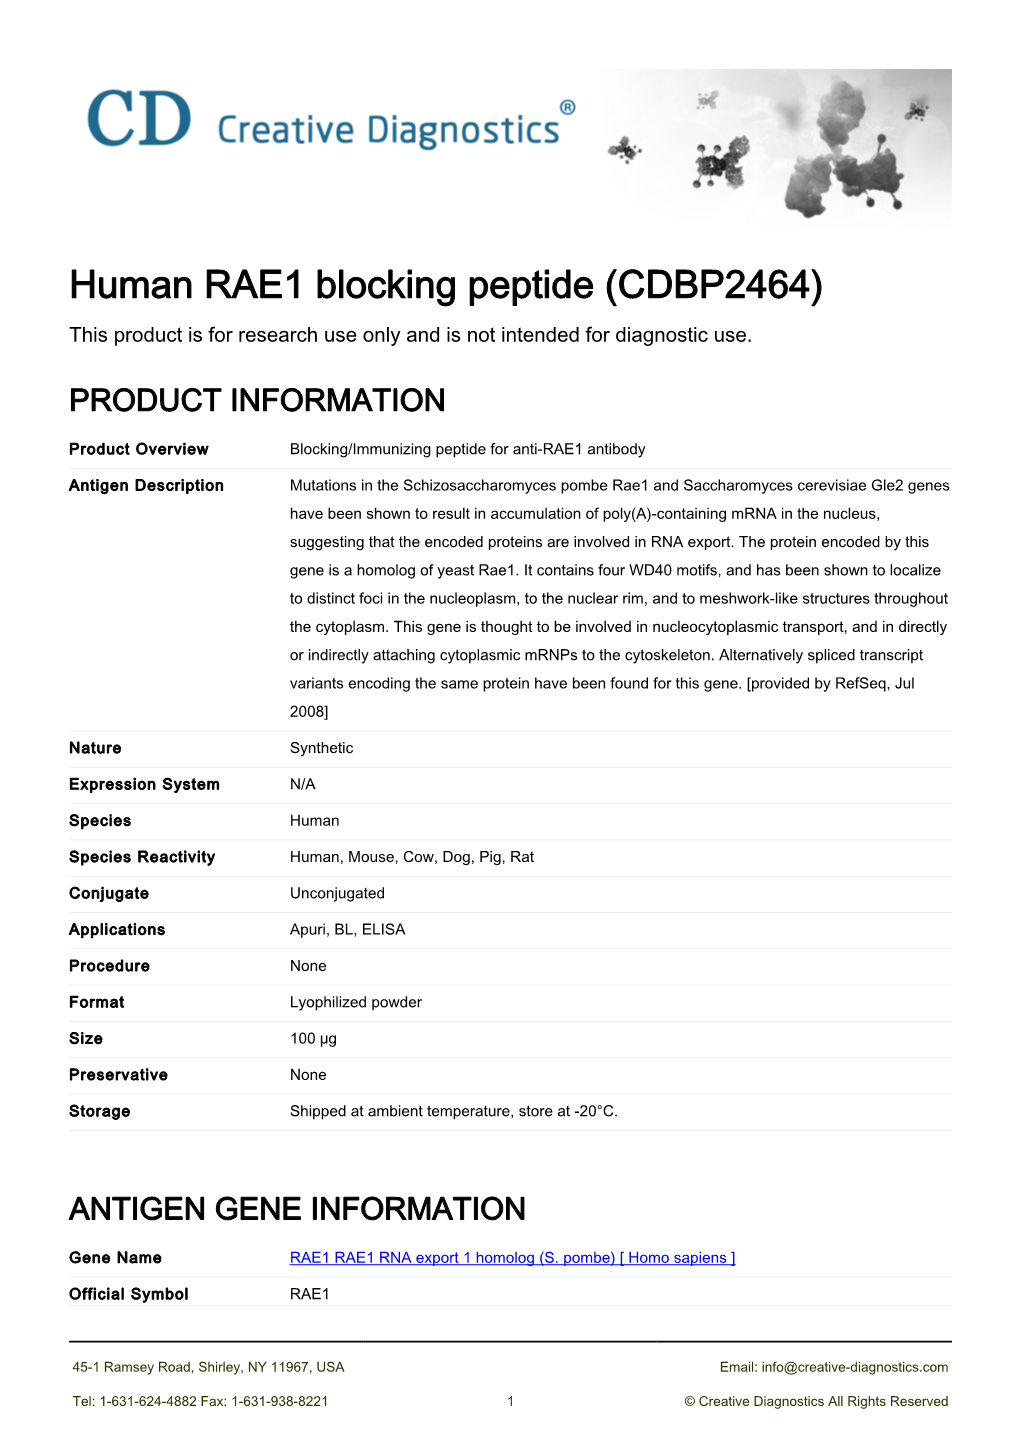 Human RAE1 Blocking Peptide (CDBP2464) This Product Is for Research Use Only and Is Not Intended for Diagnostic Use